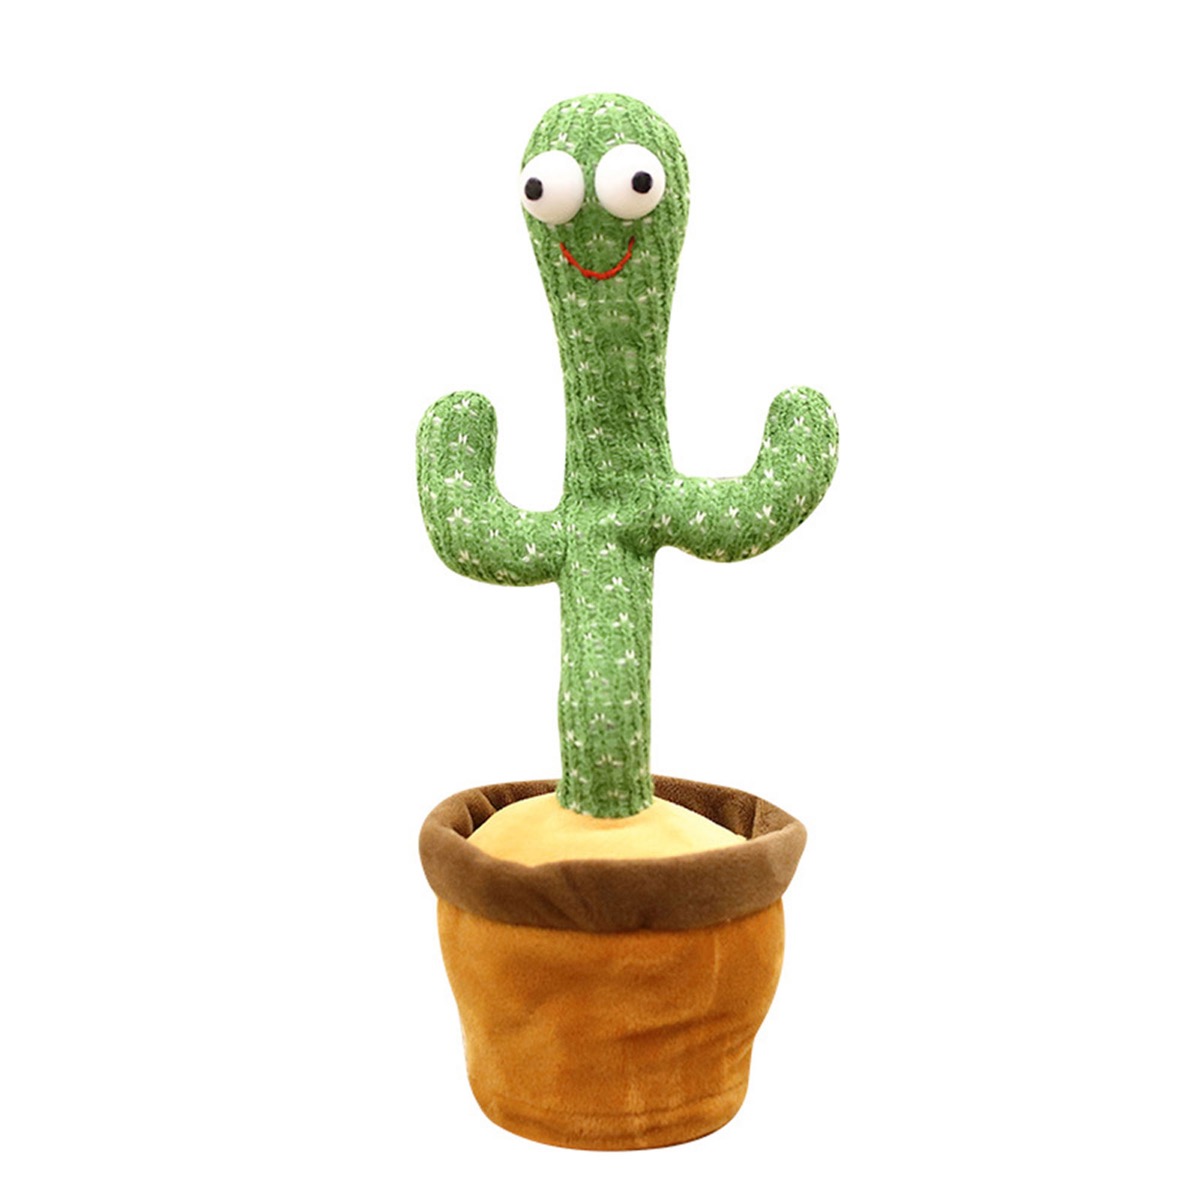 dancing cactus toy on white background